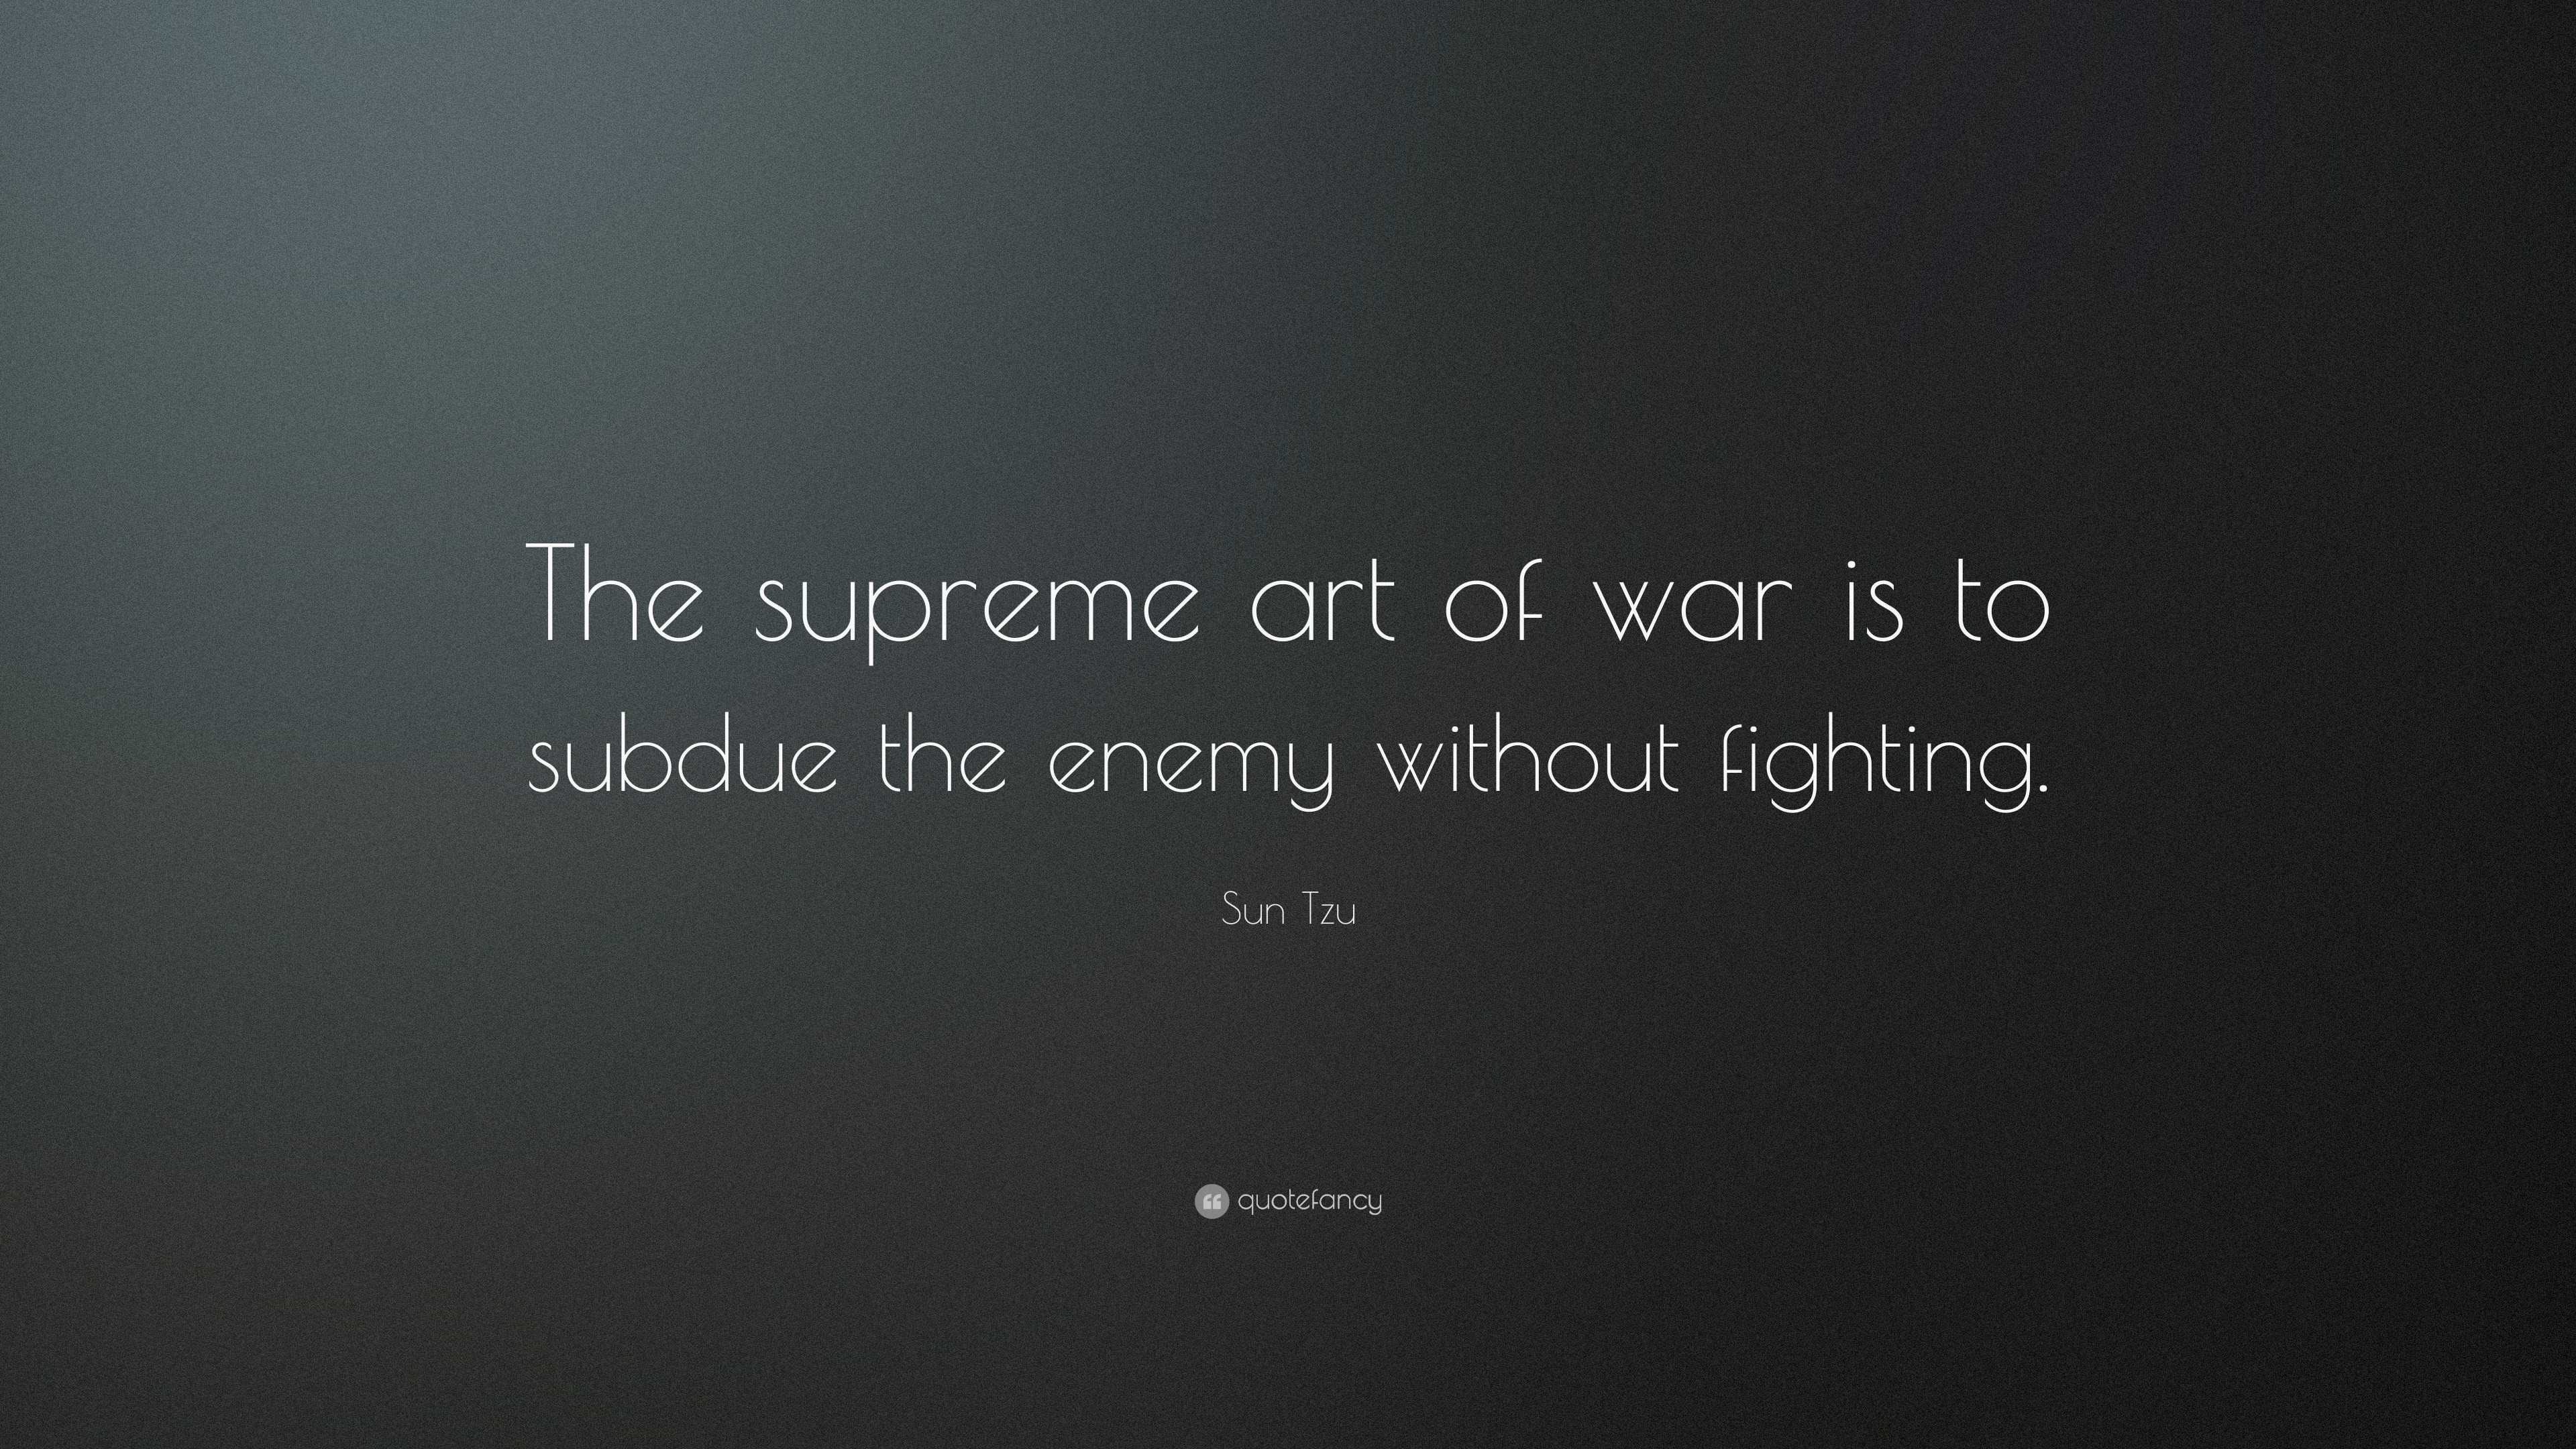 Sun Tzu Quote: “The supreme art of war is to subdue the enemy without